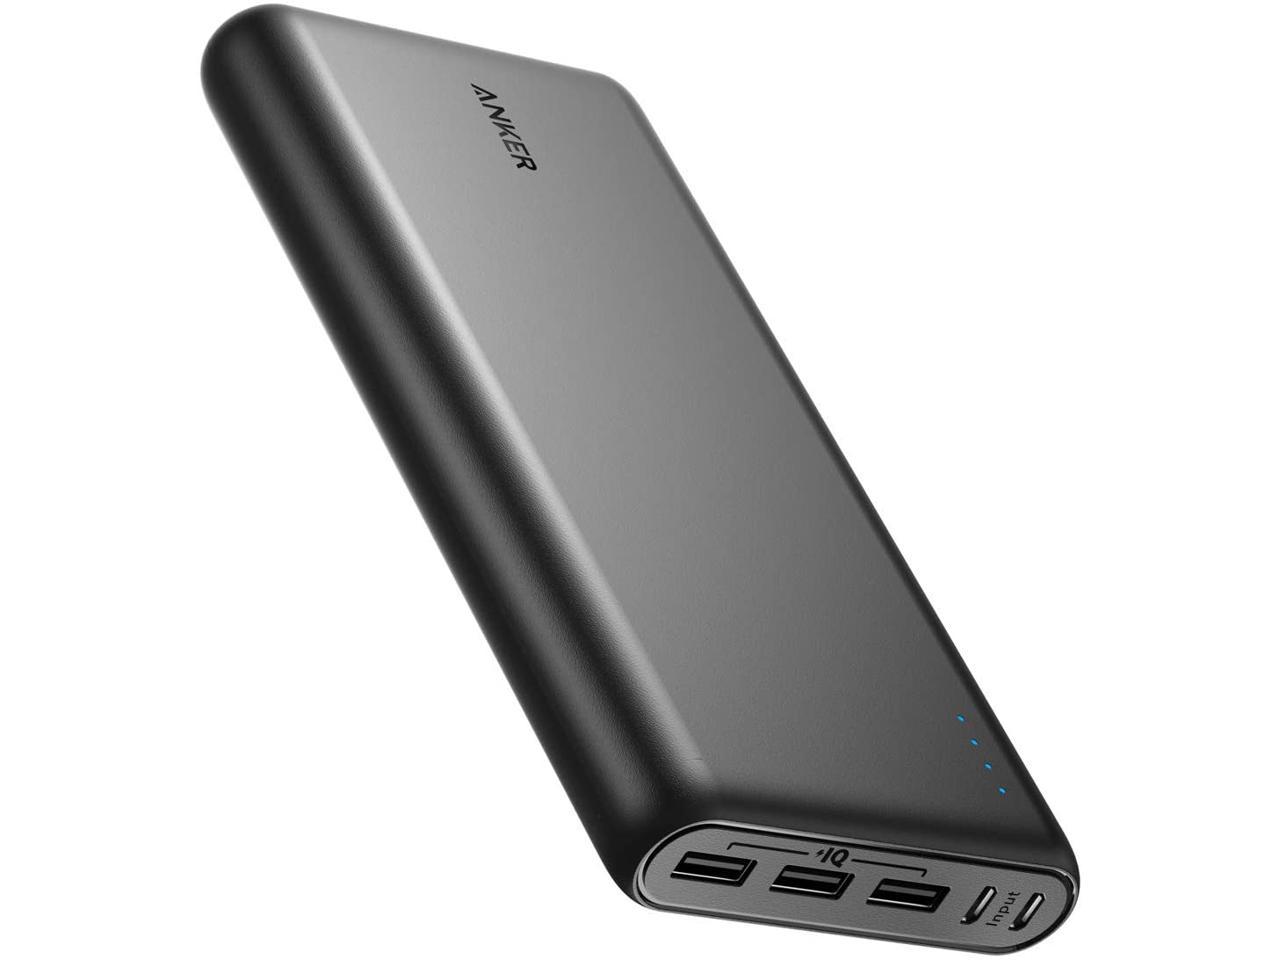 Anker PowerCore 26800 Portable Charger, 26800mAh External Battery w/ Dual Input Port , Double-Speed Recharging *RFB* (Group Buy) $26